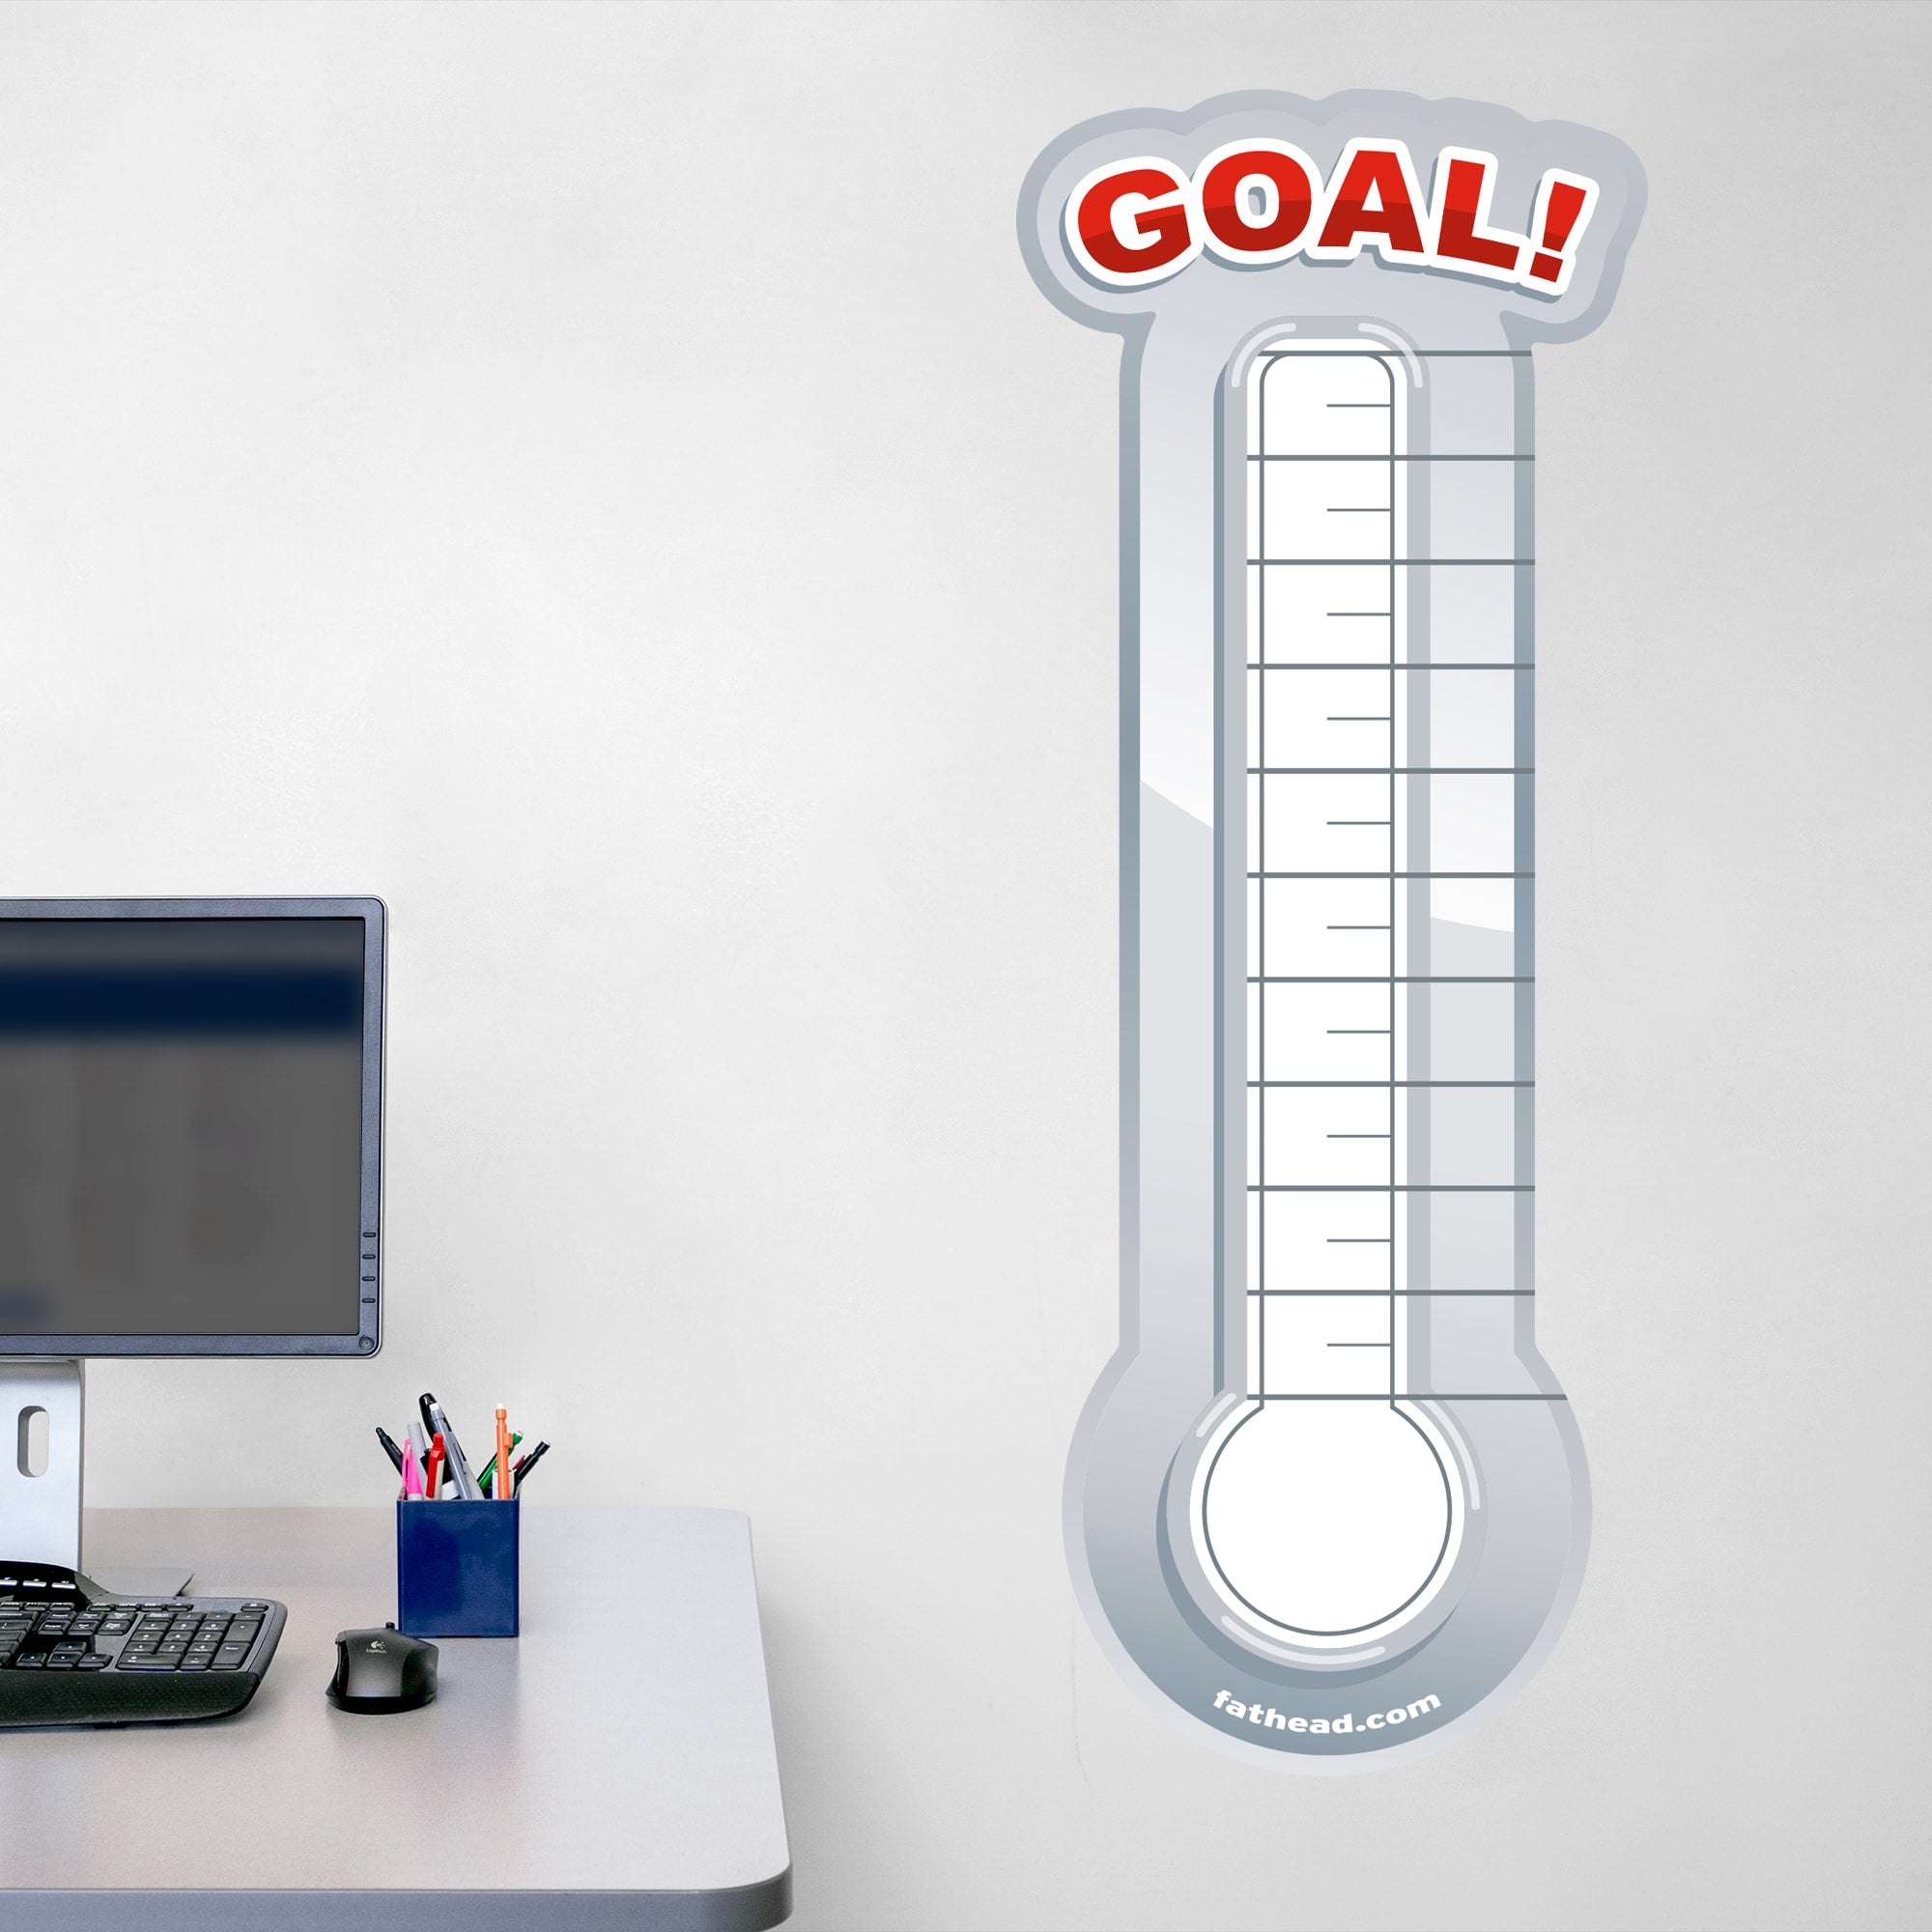 Goal Thermometer - Removable Dry Erase Vinyl Decal in Gray (18"W x 47"H) by Fathead